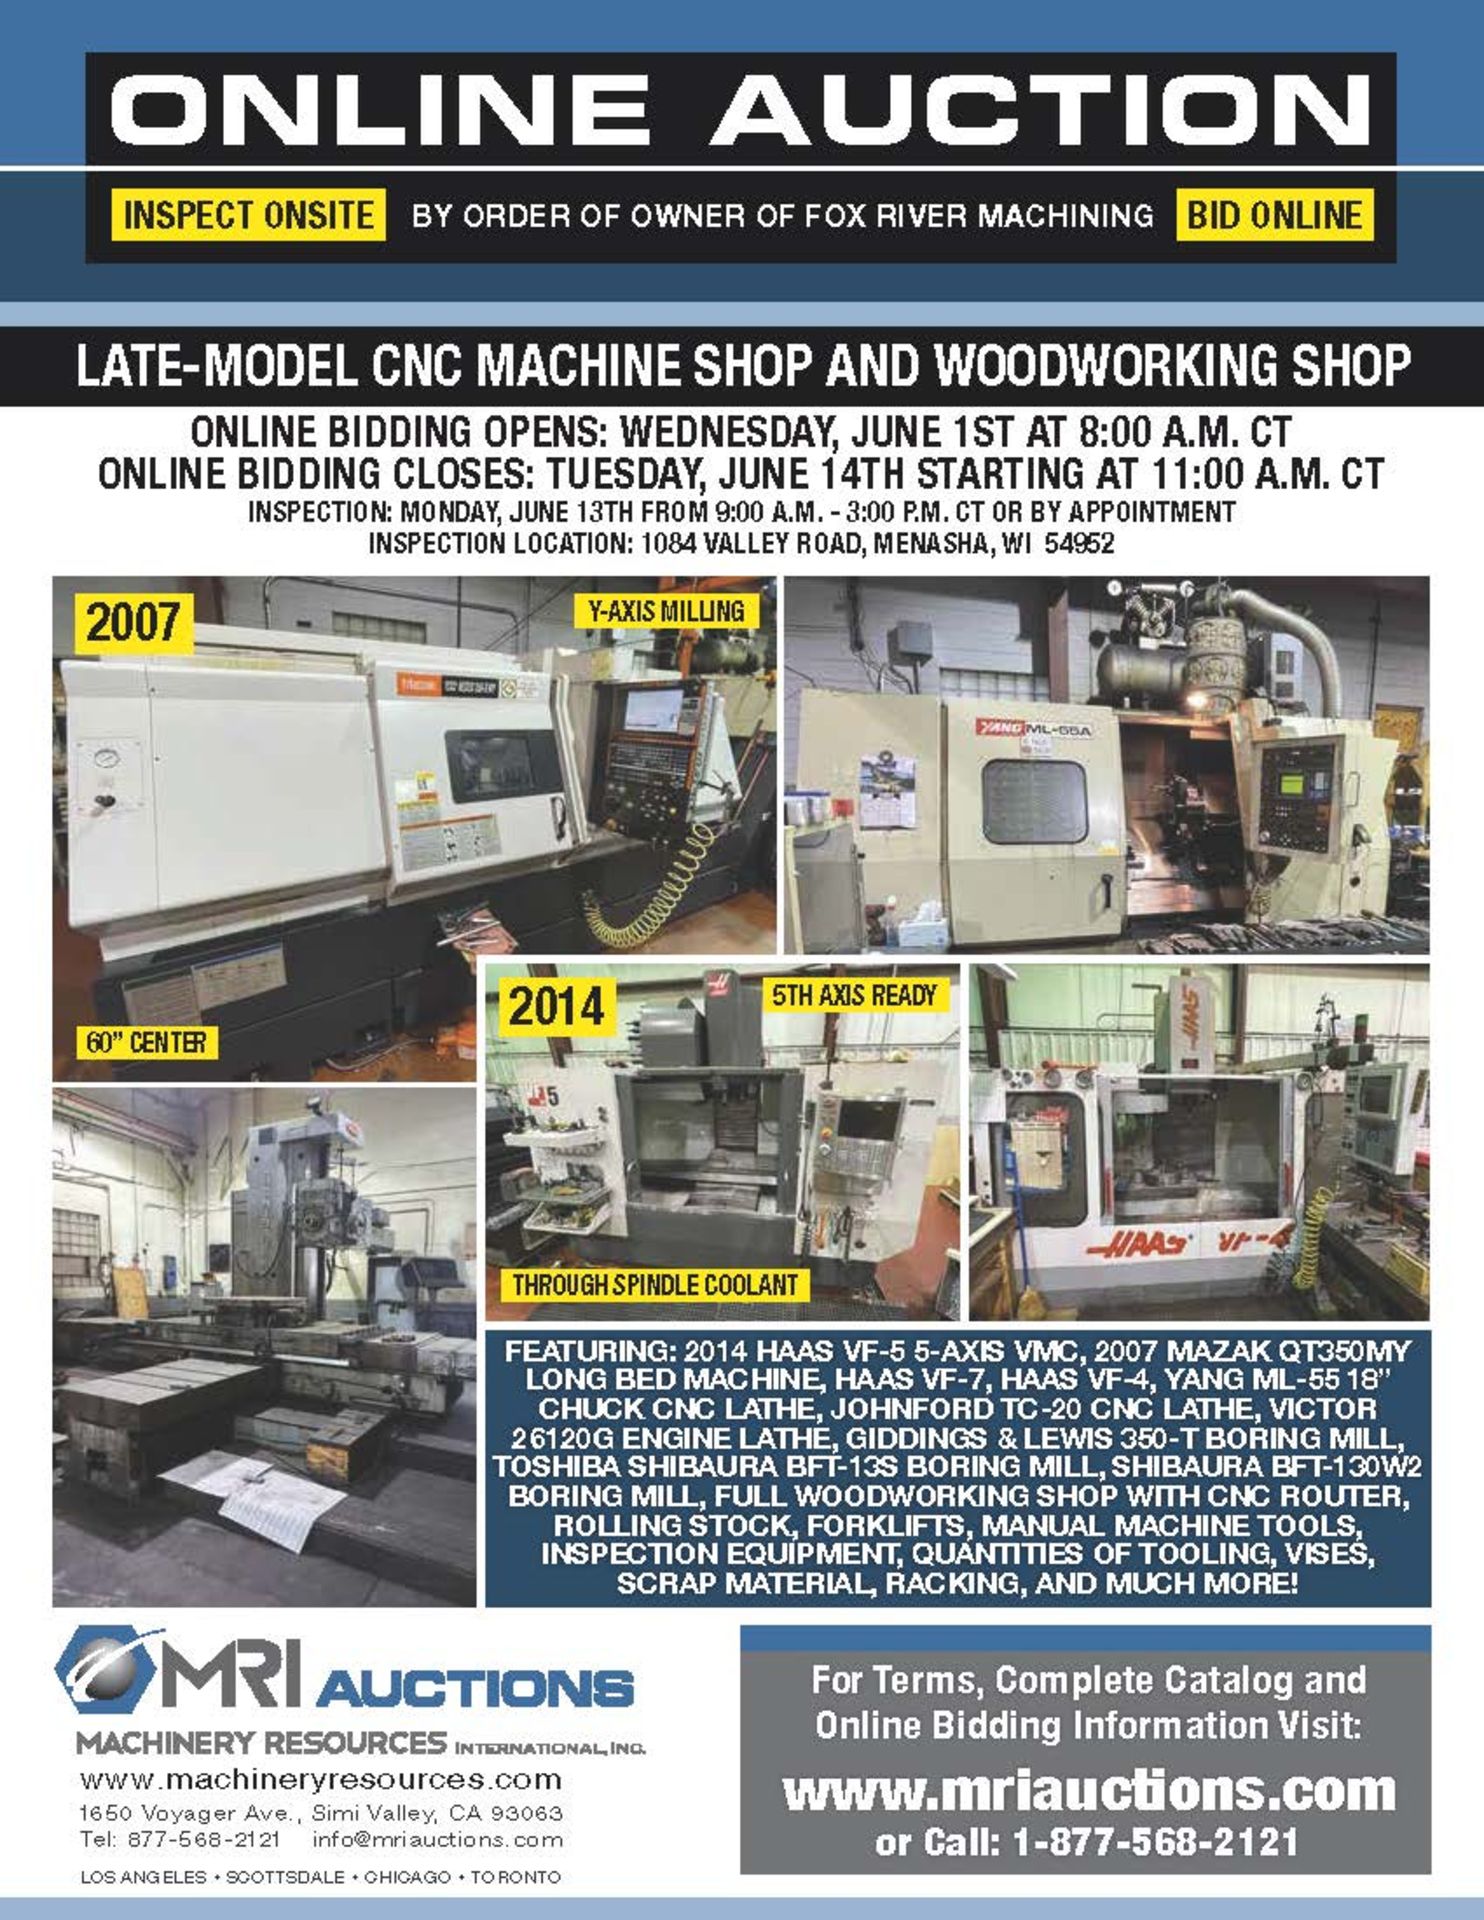 LATE-MODEL CNC MACHINE AND WOODWORKING SHOP – BY ORDER OF OWNER OF FOX RIVER MACHINING